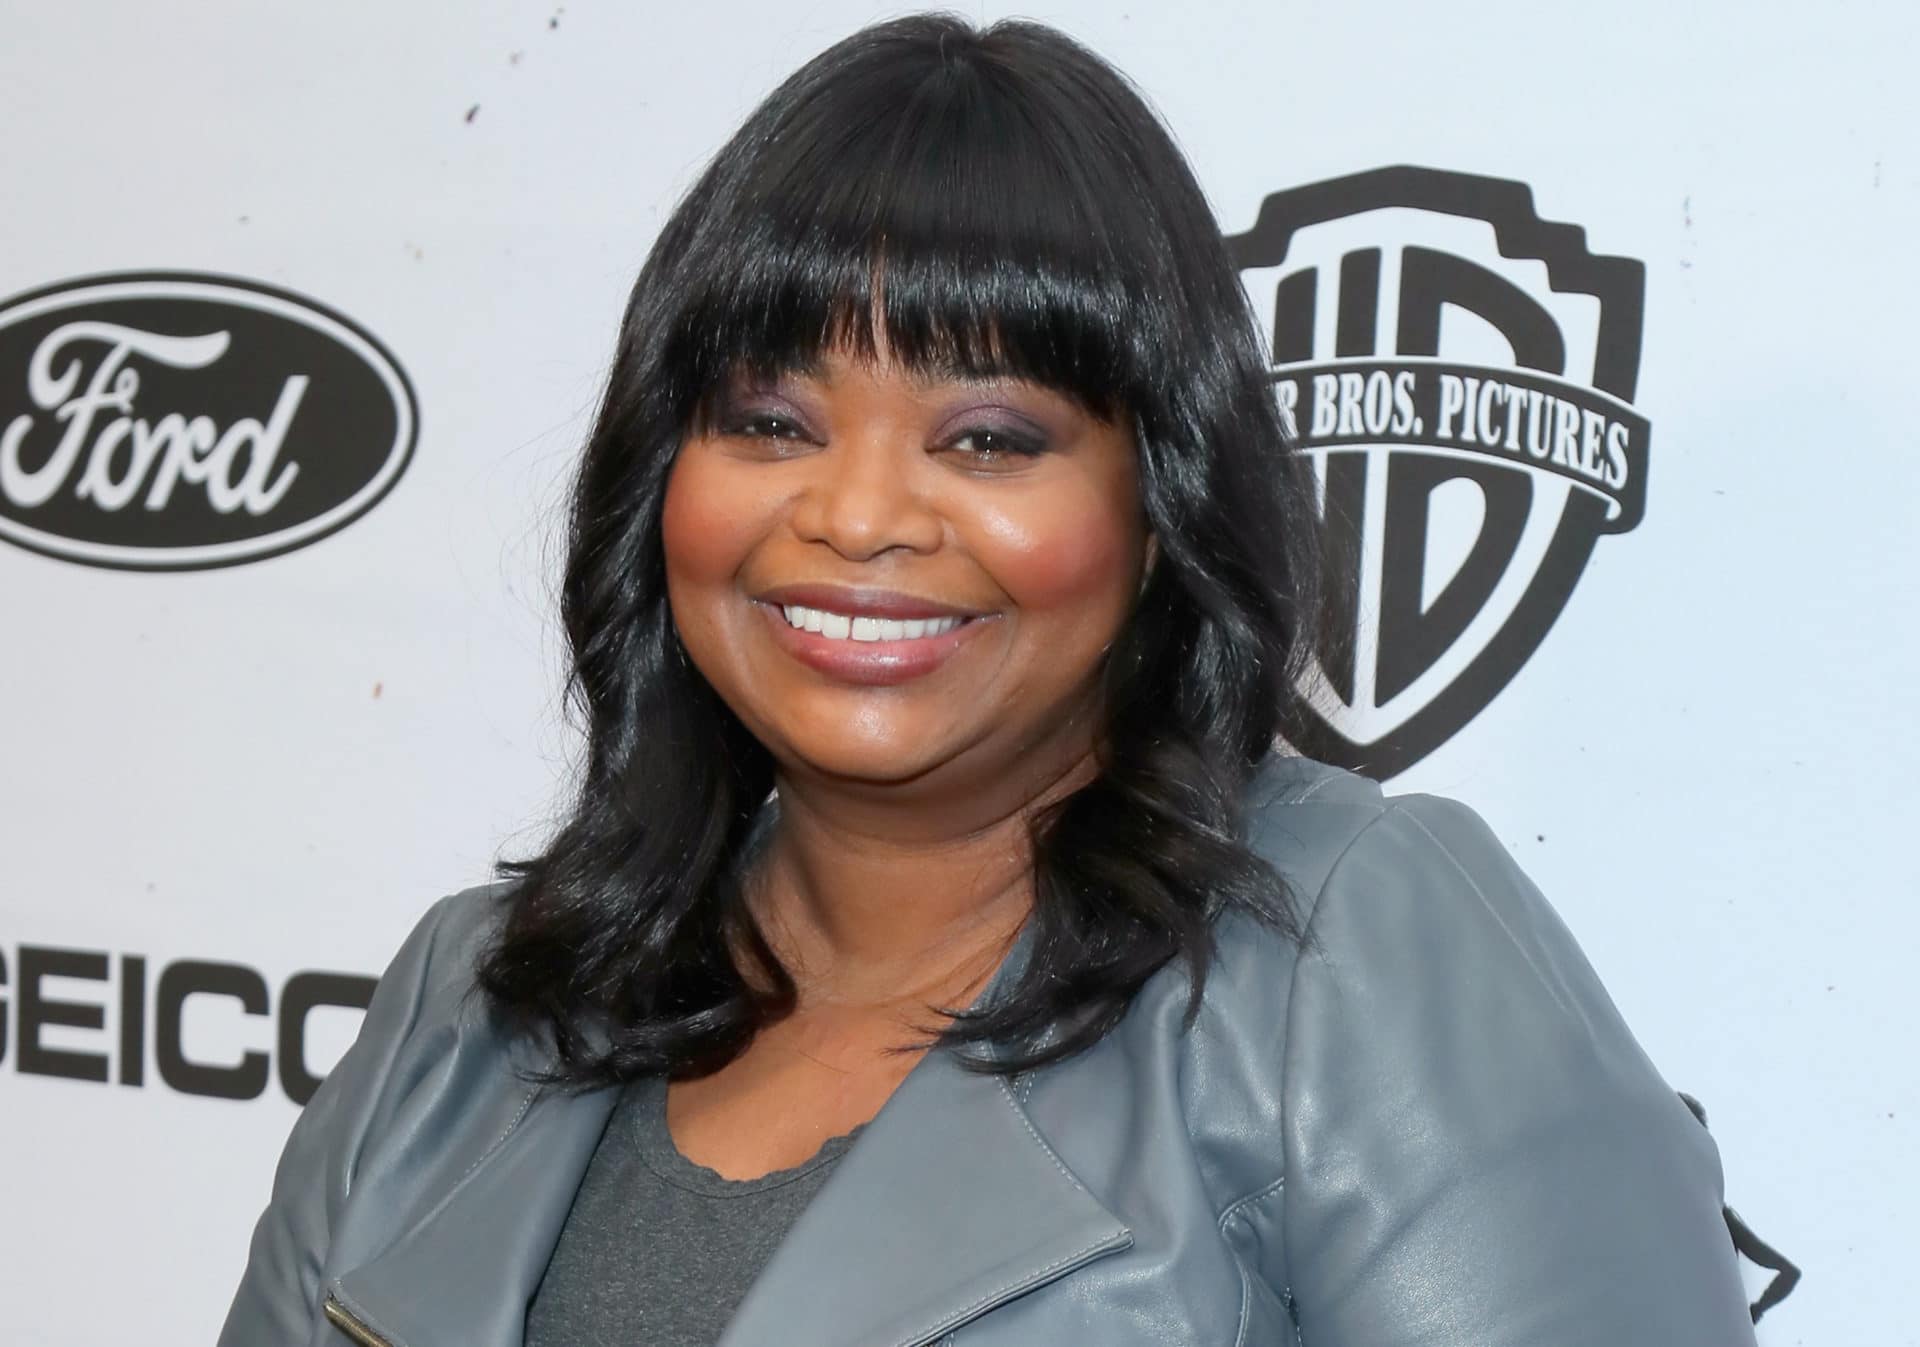 Octavia Spencer's Advice For Getting Equal Pay: 'Take The Emotion Out Of Negotiation'